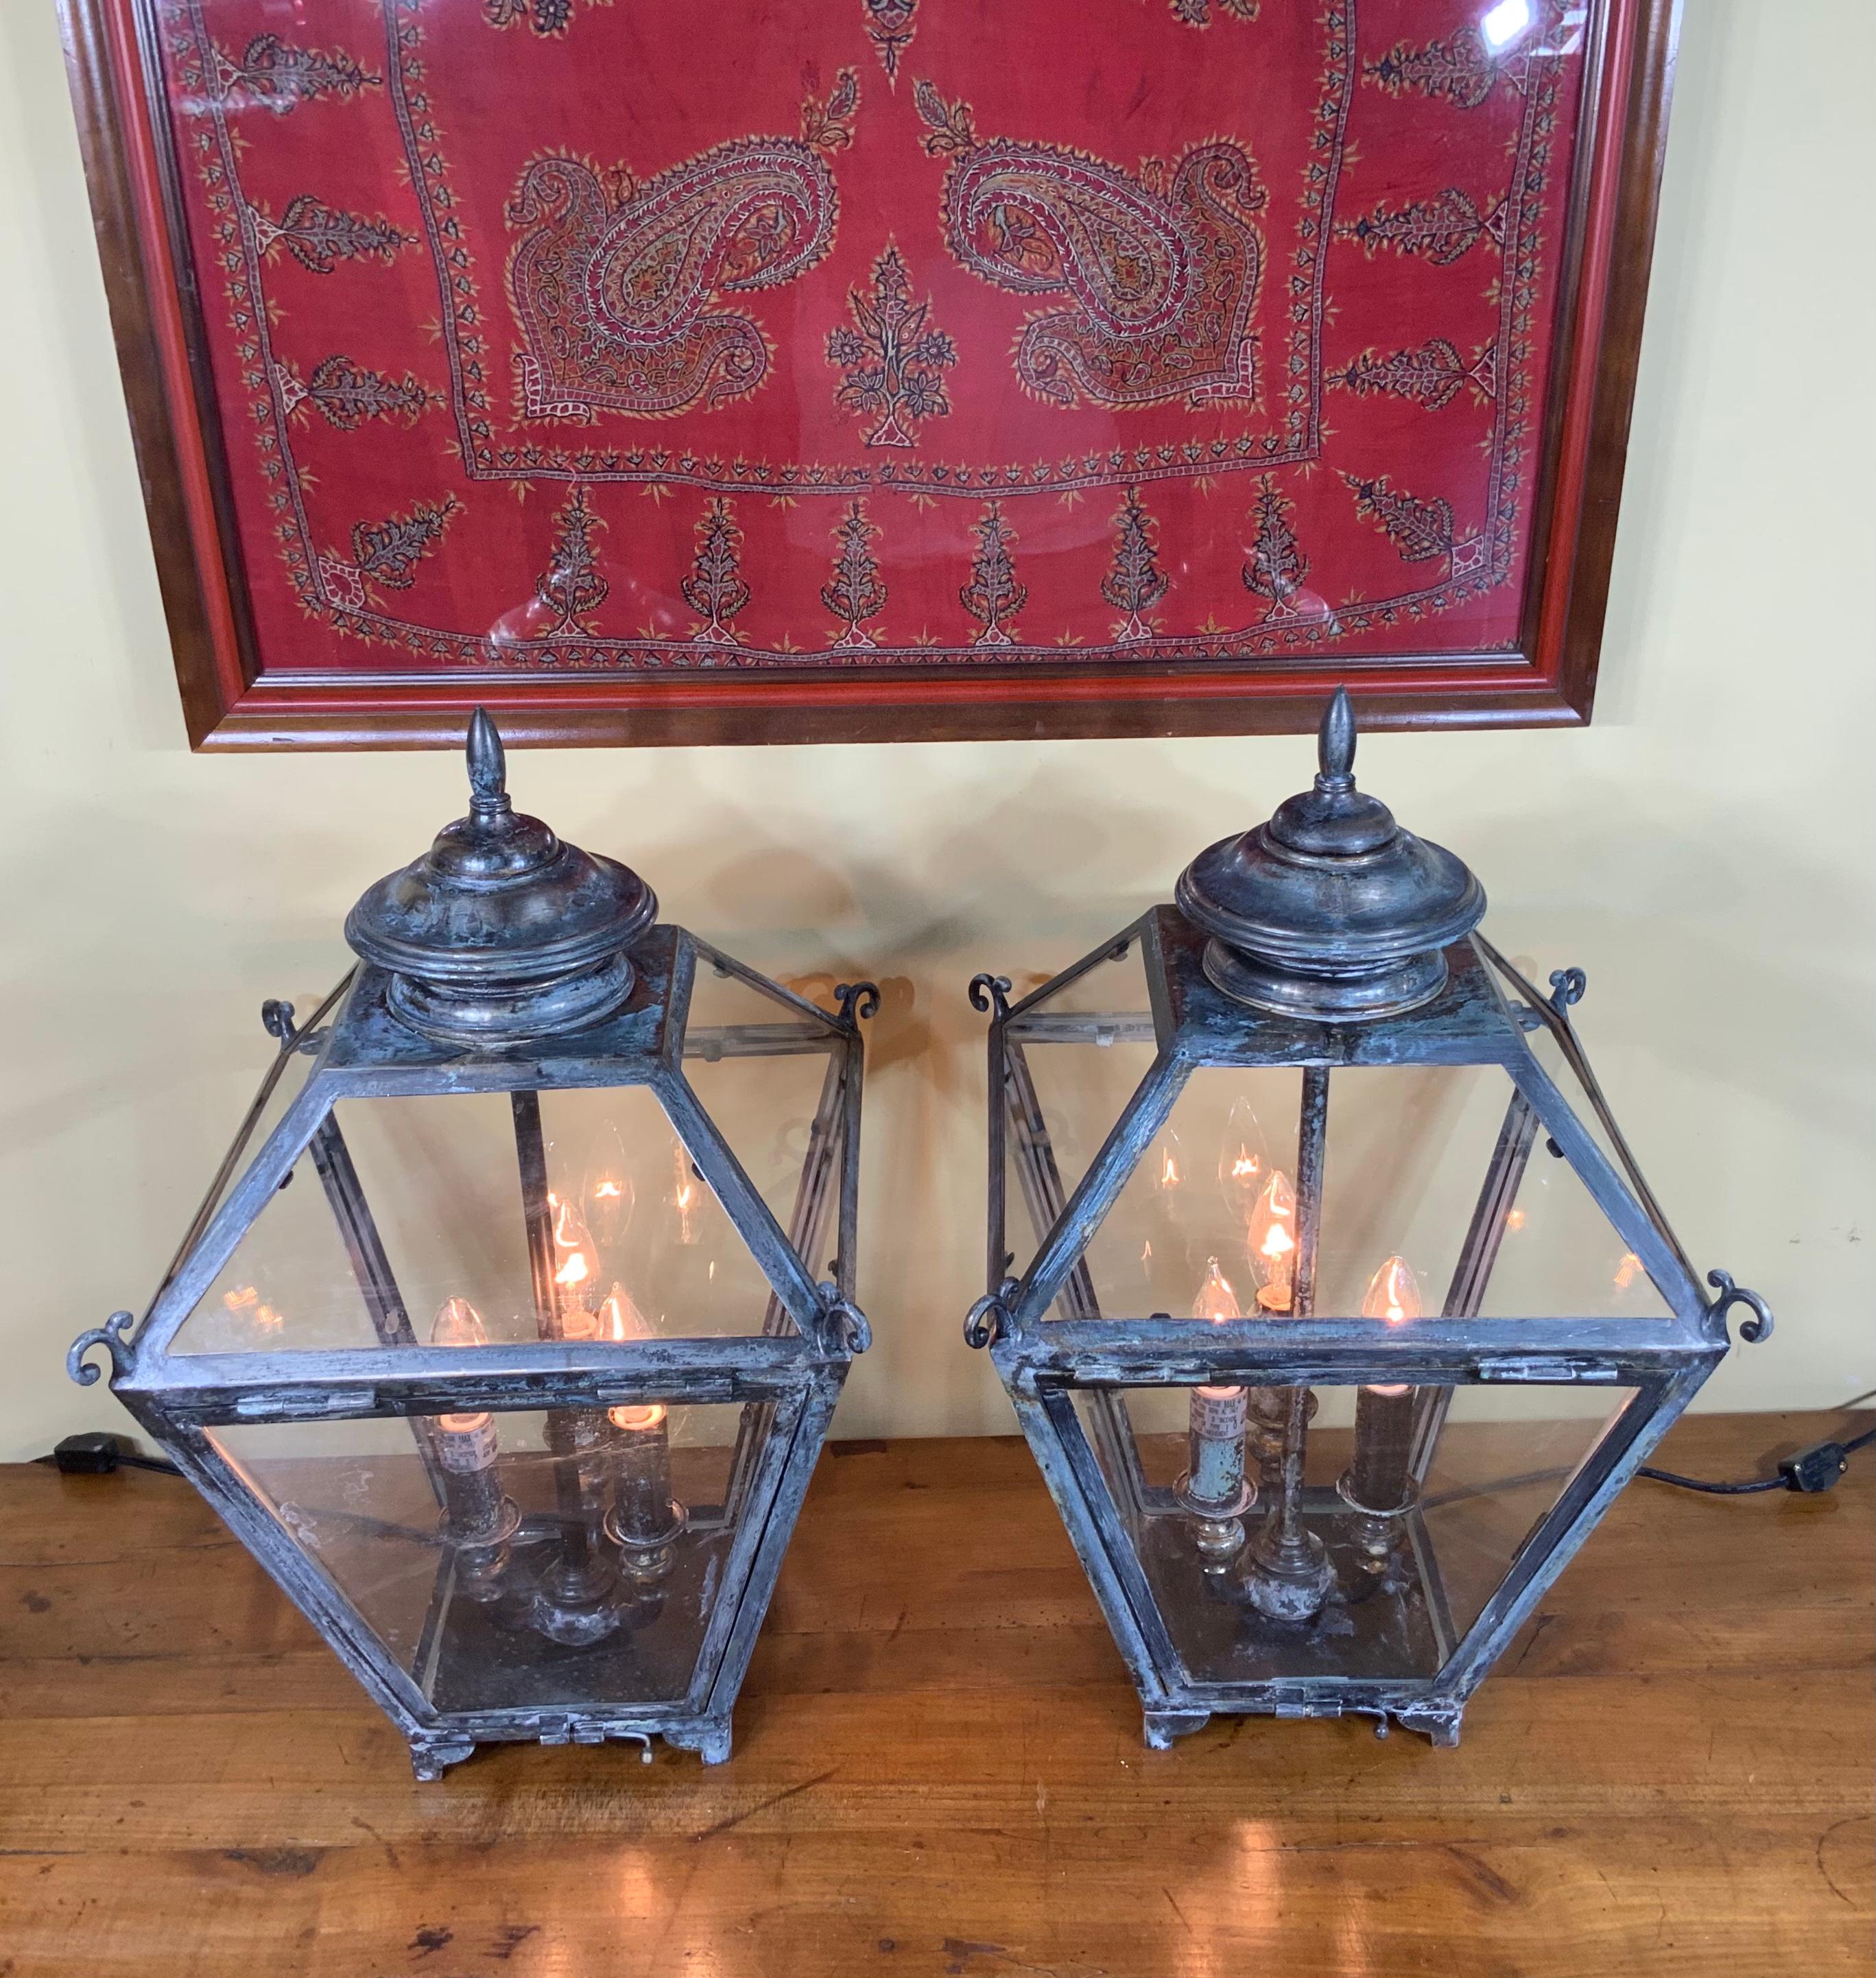 Pair of elegant hand crafted quality made table lamps lanterns, with three 40/watt light each, UL approved
Great look.